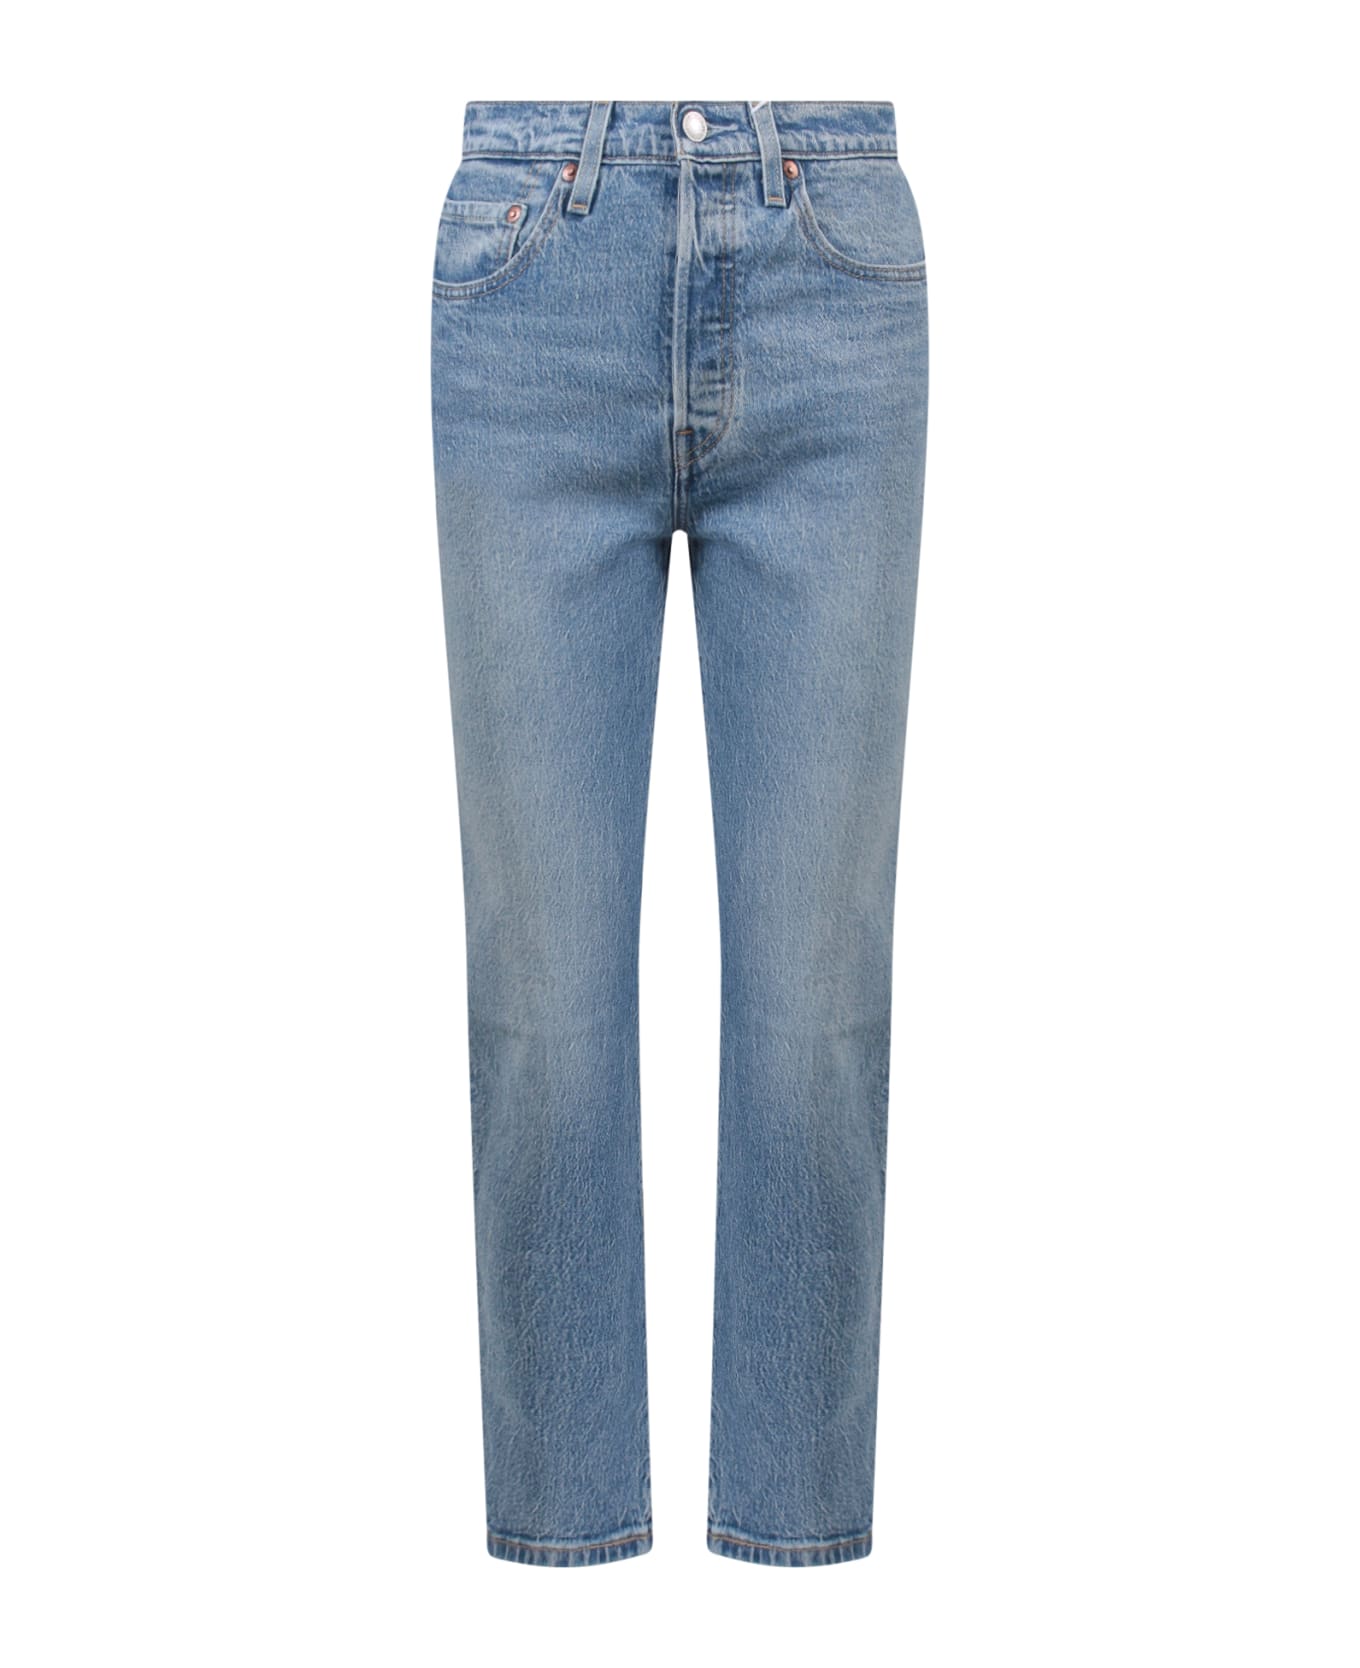 Levi's 501 Jeans - Clear Blue デニム